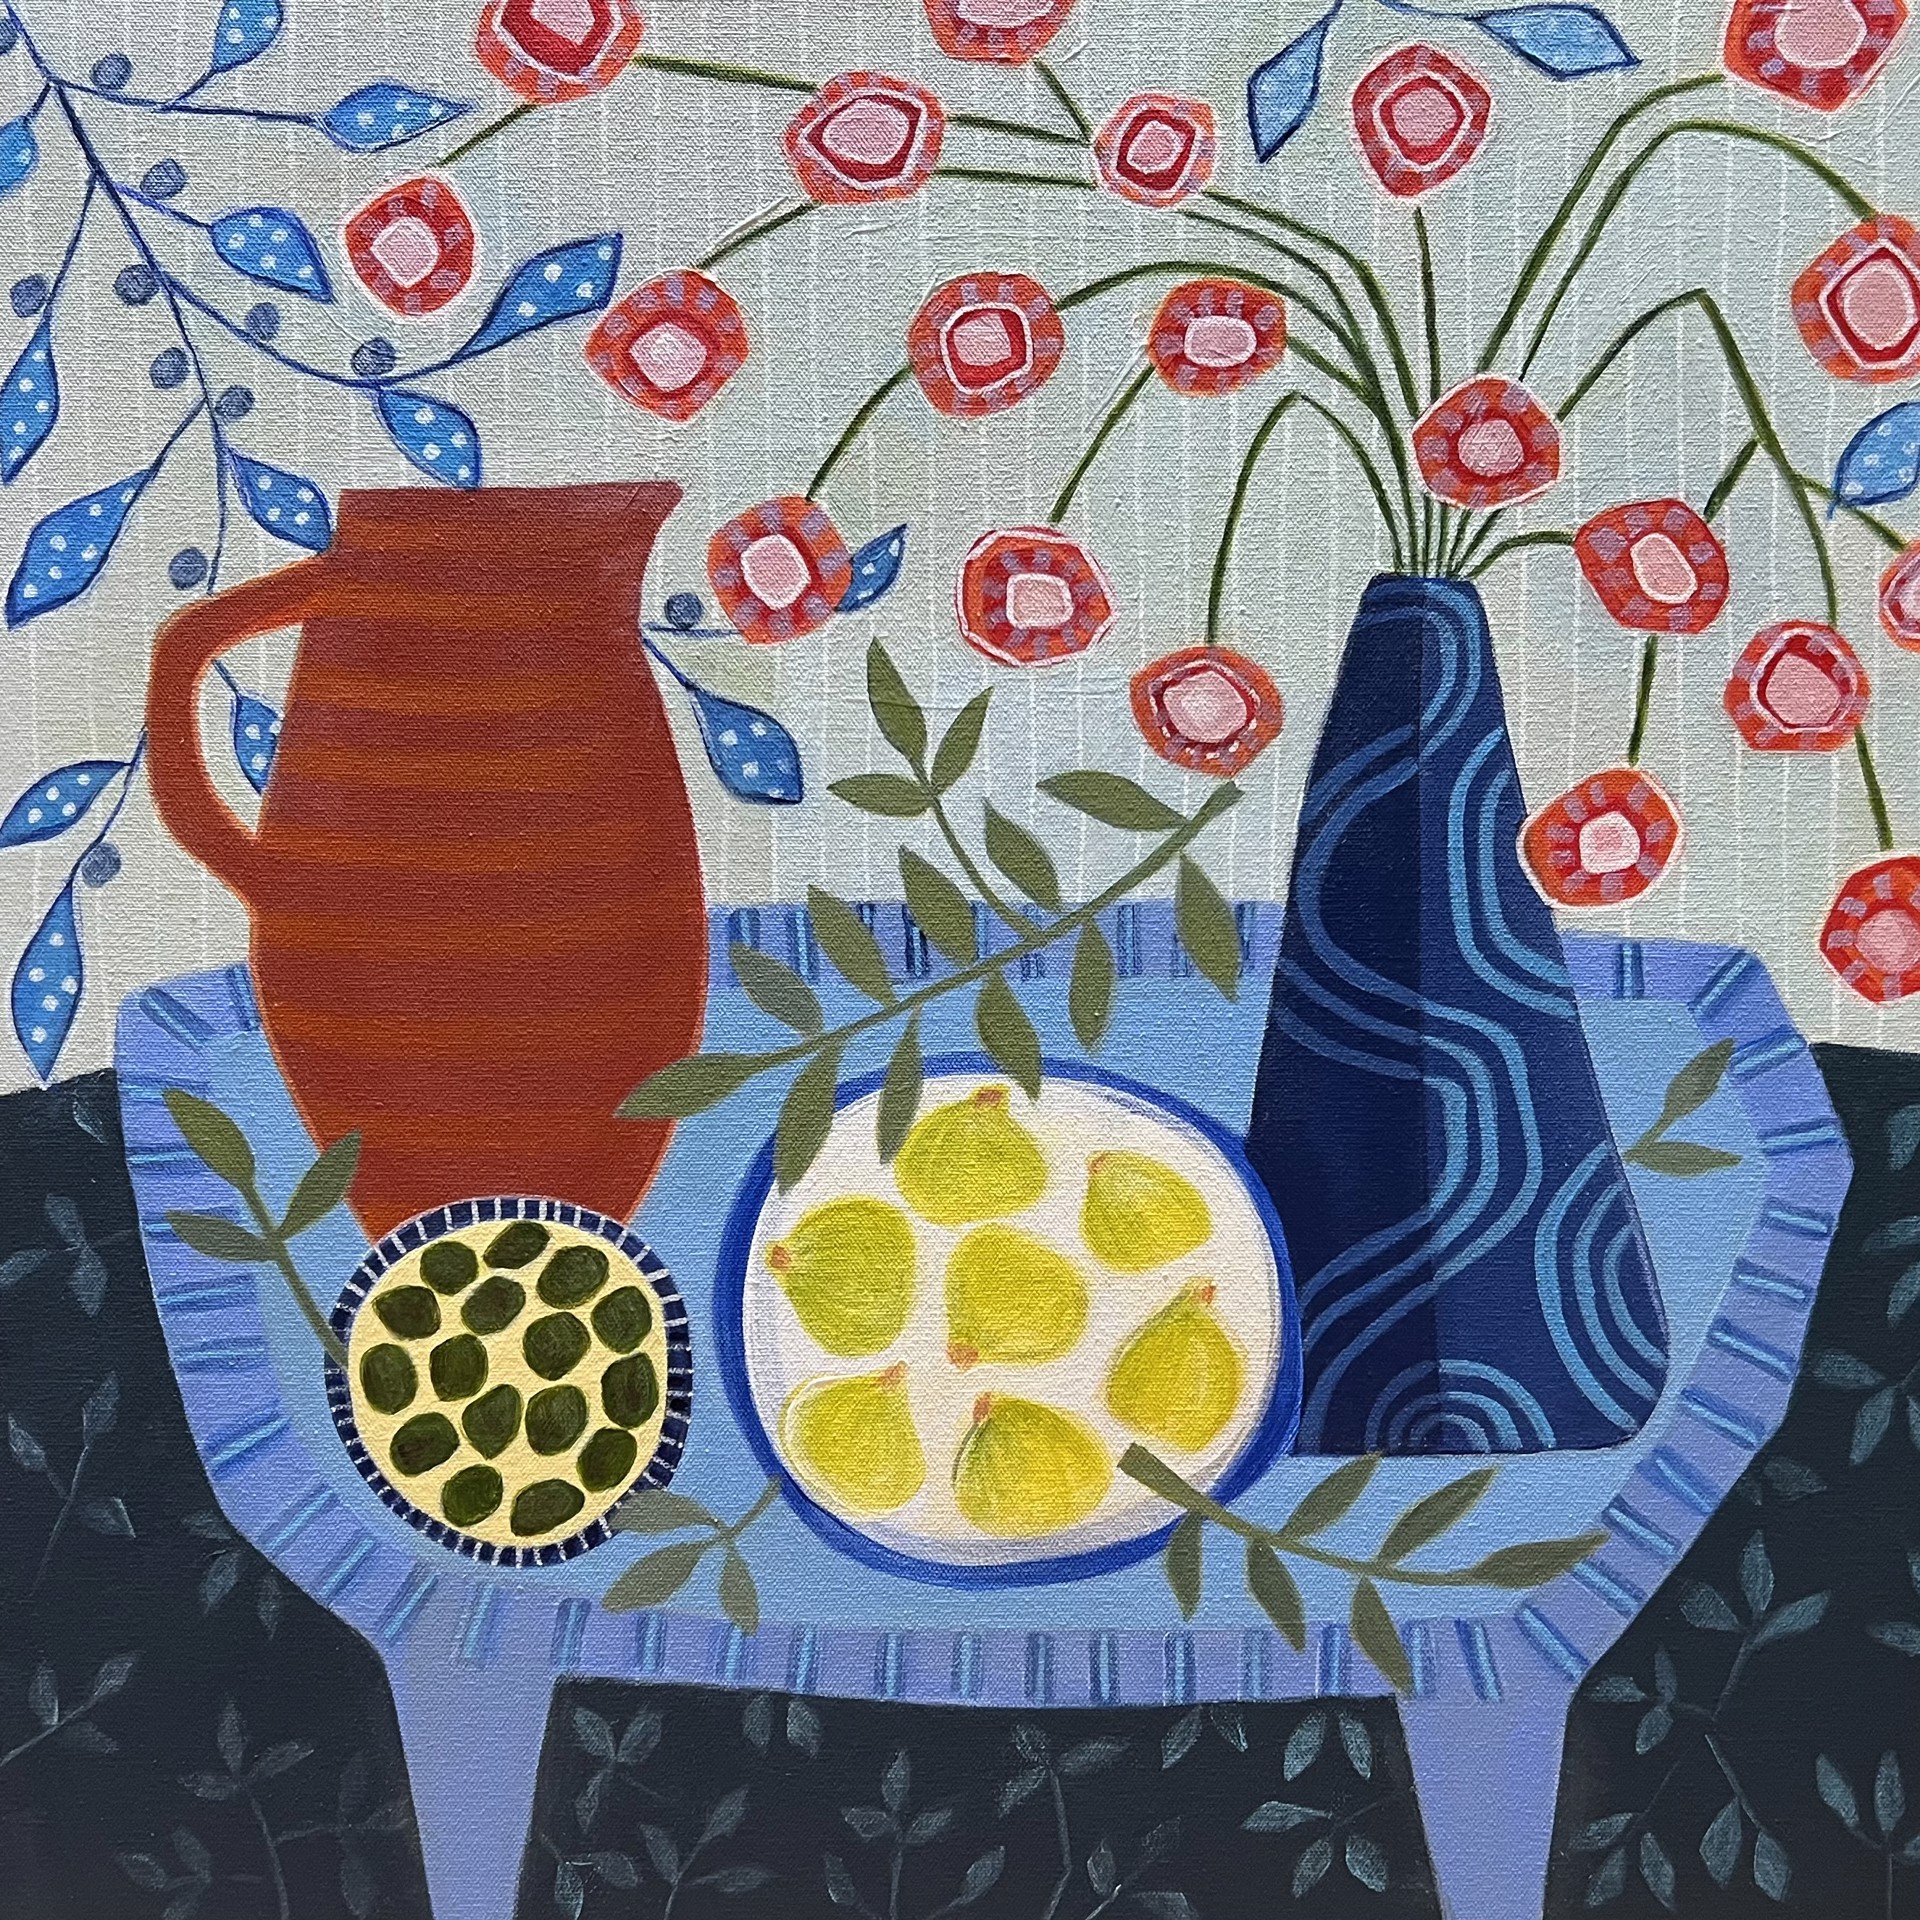 Olives and Figs by Joyce Grasso